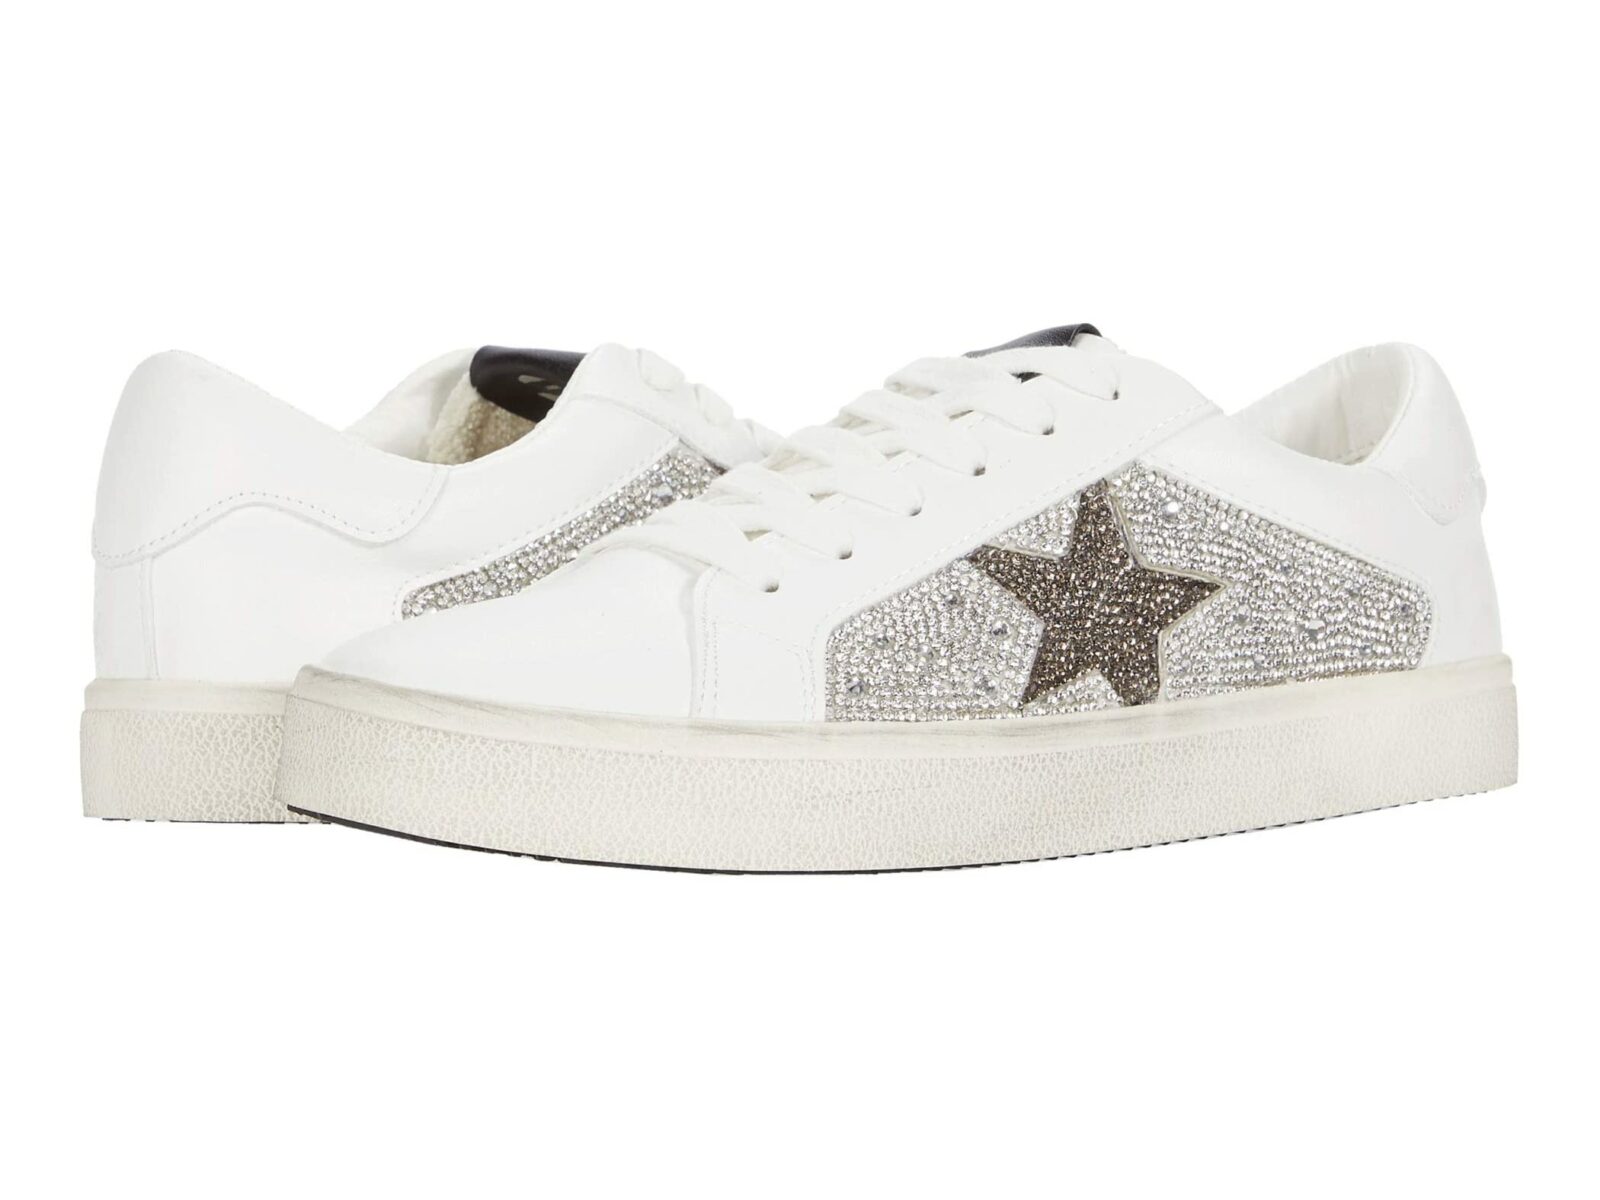 12 Best Golden Goose Dupes Sneakers To Try In 2021